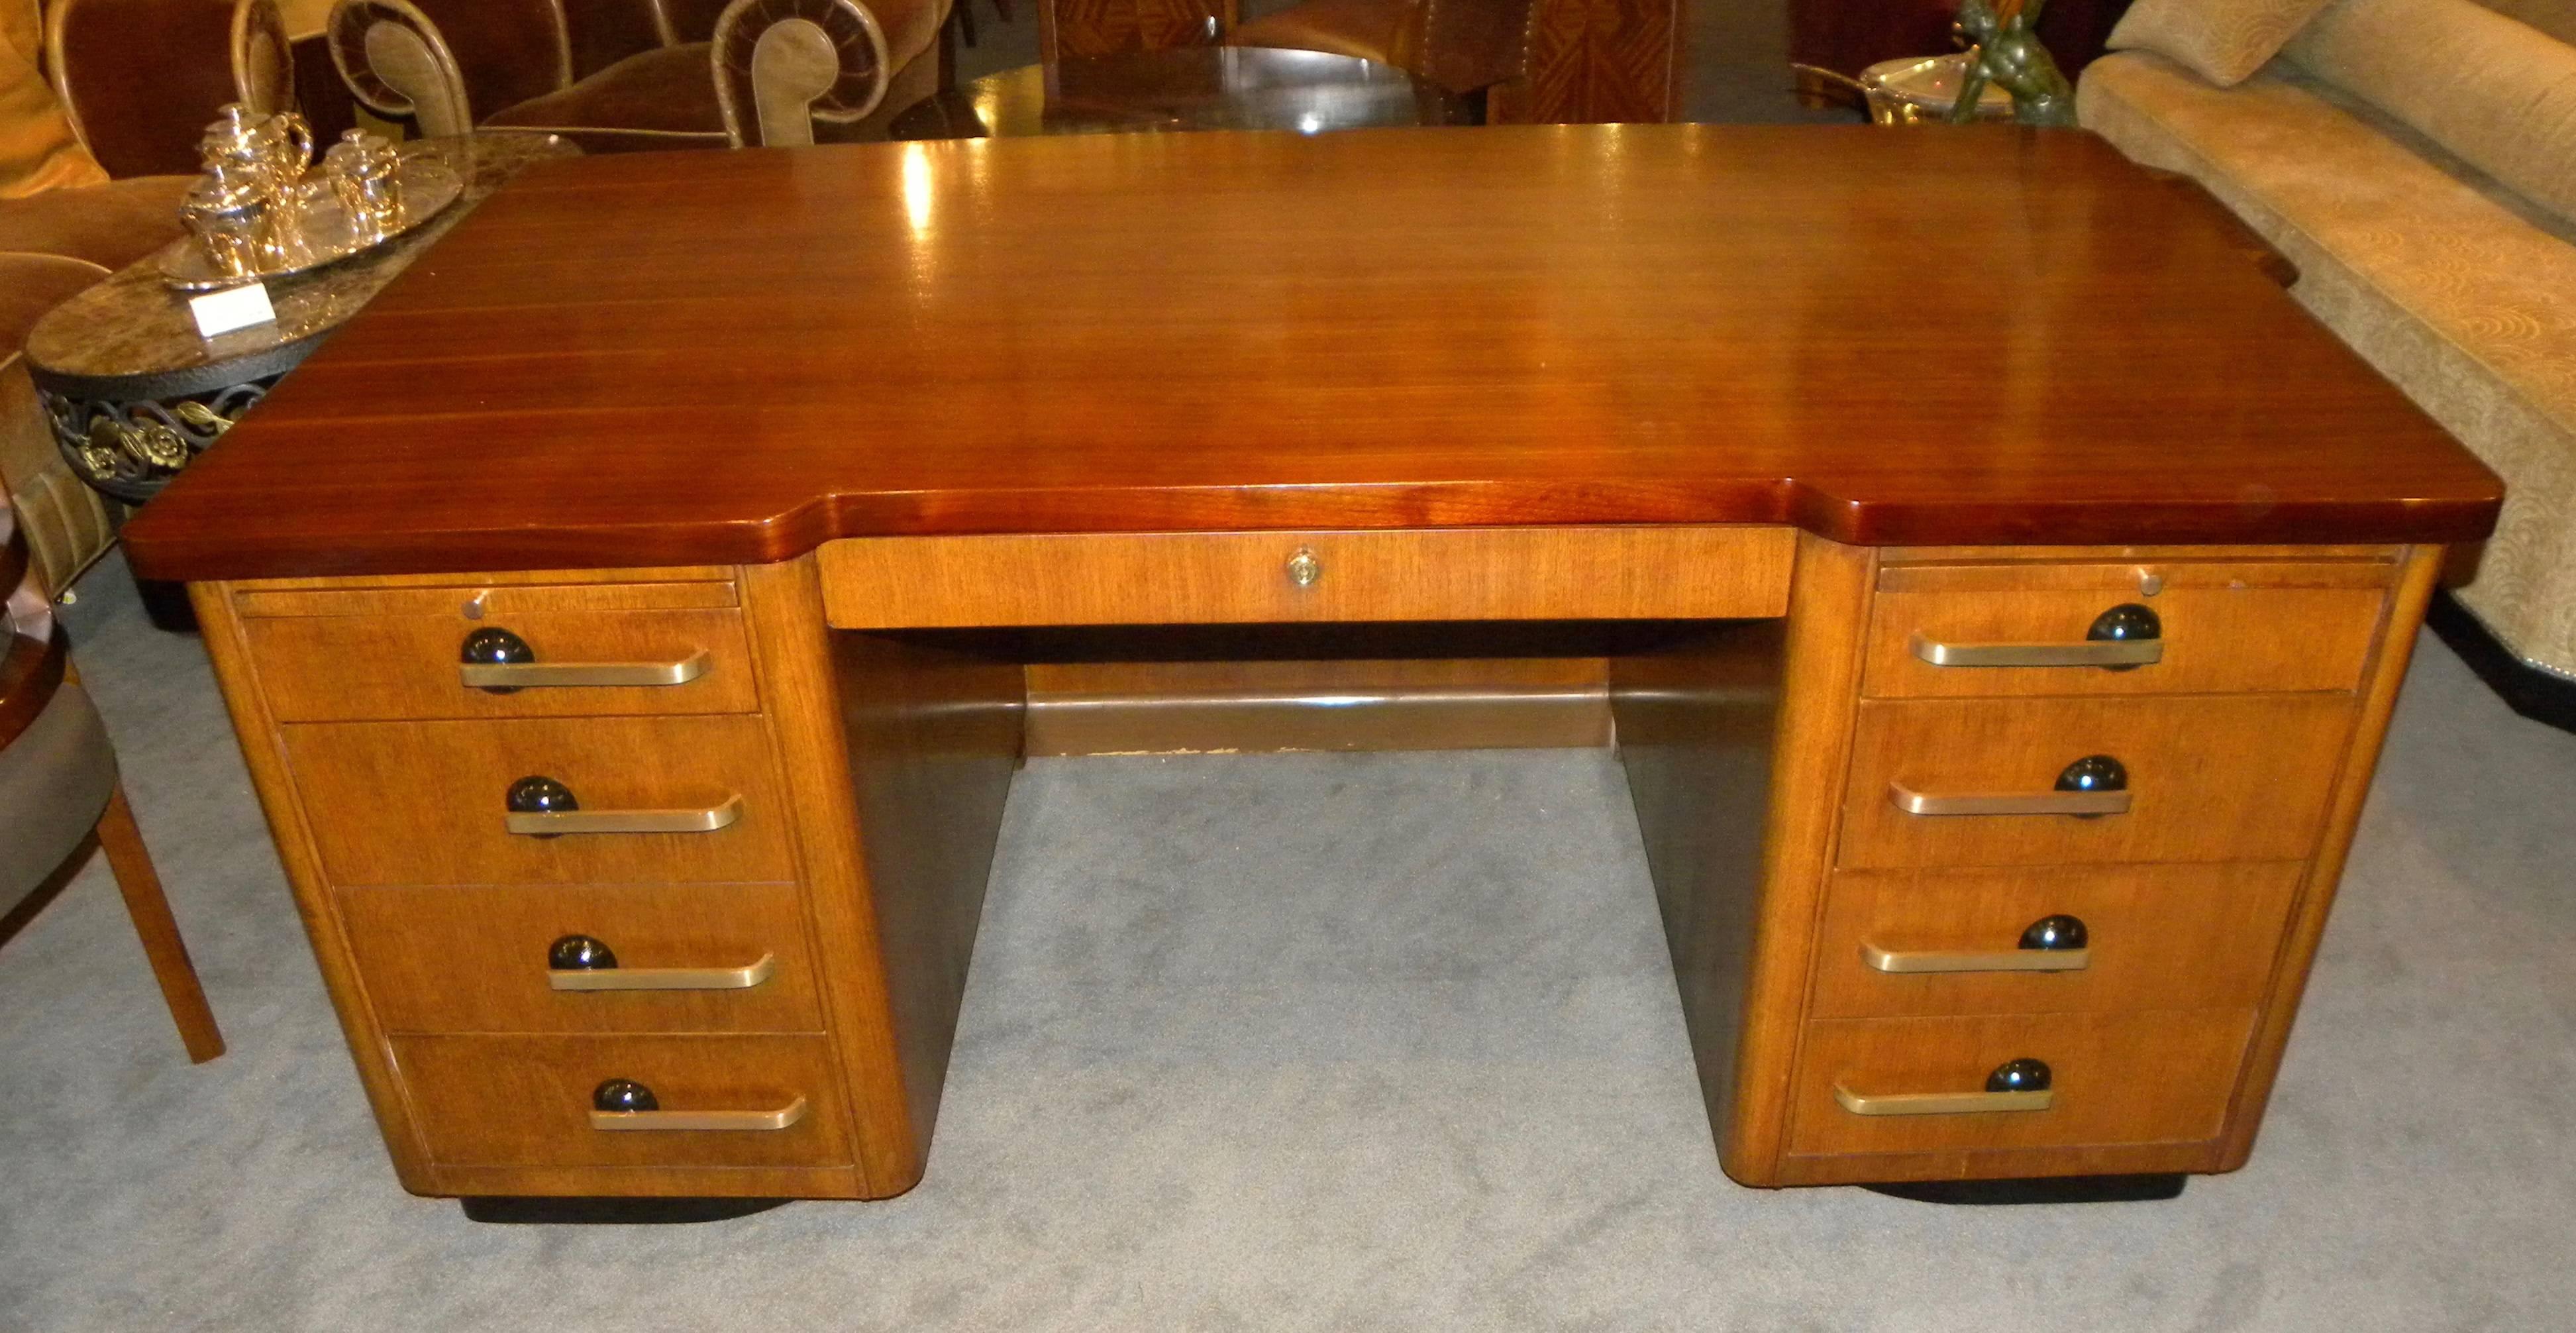 Brass Professional Art Deco Desk by Stow and Davis